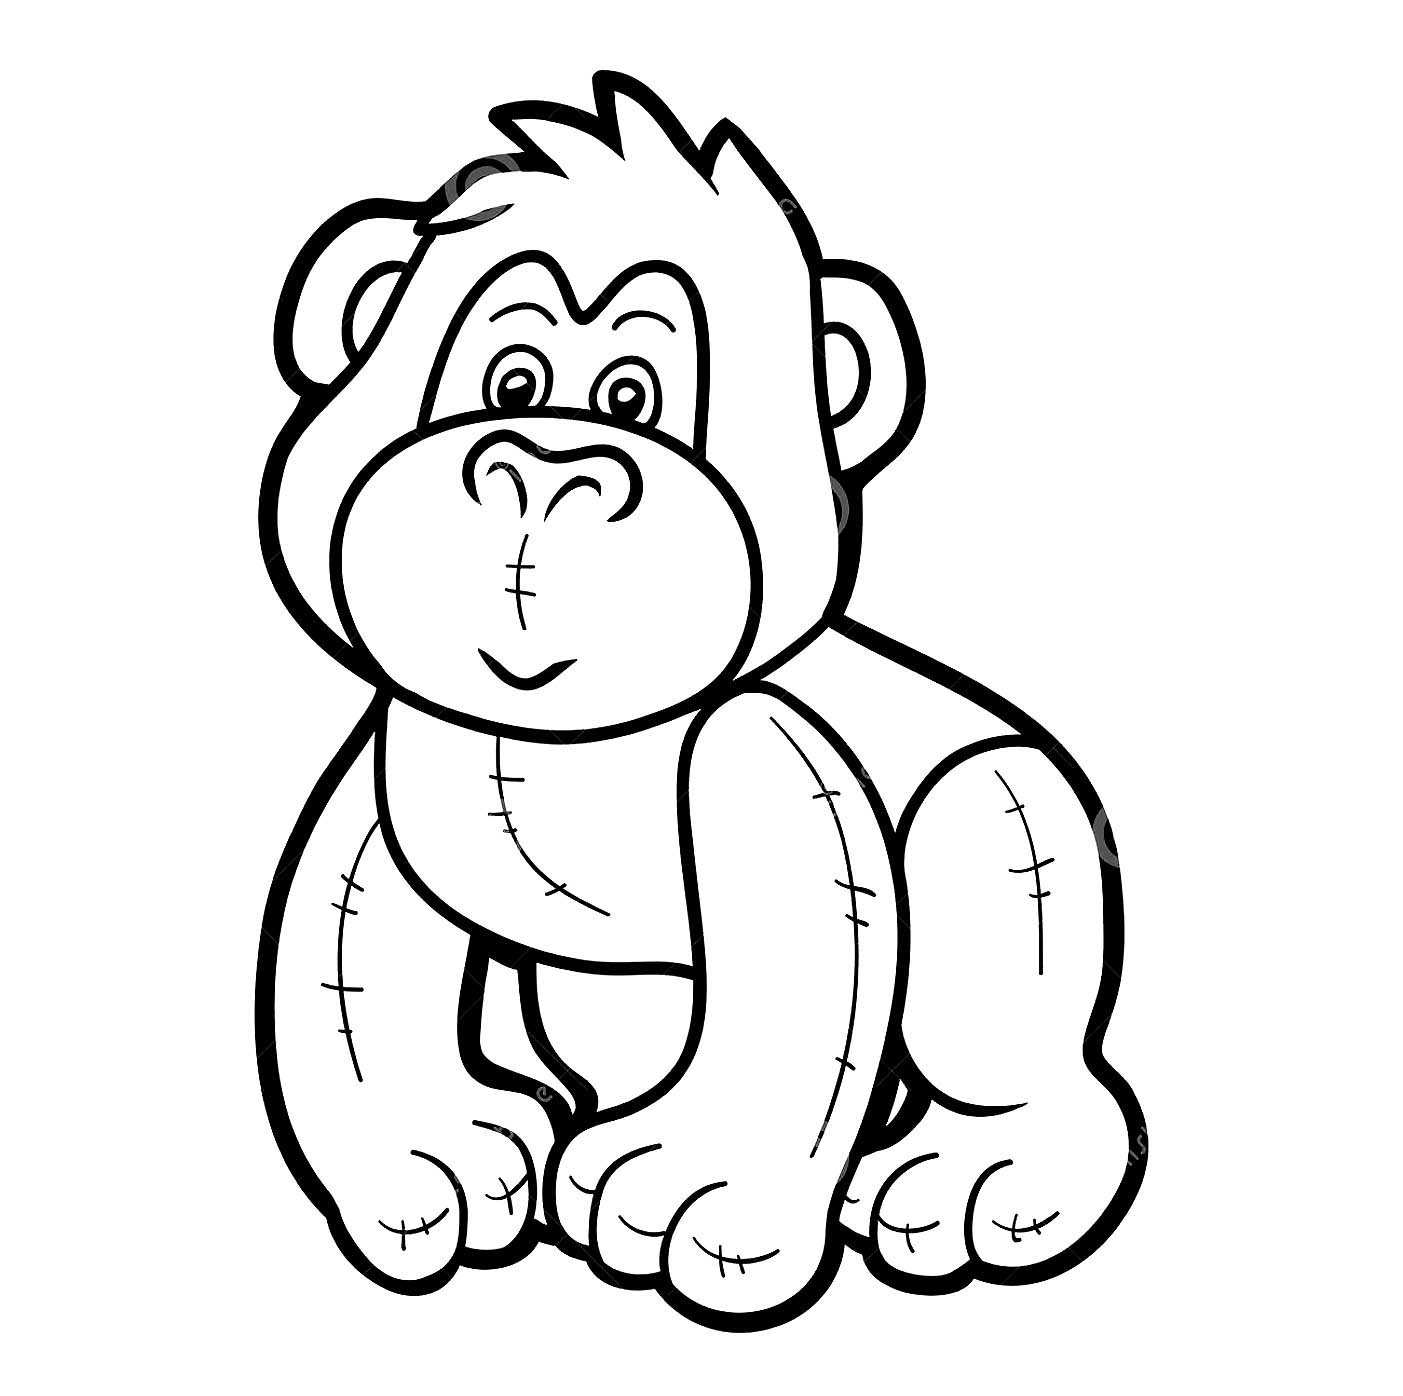 gorilla-coloring-pages-printable-printable-templates